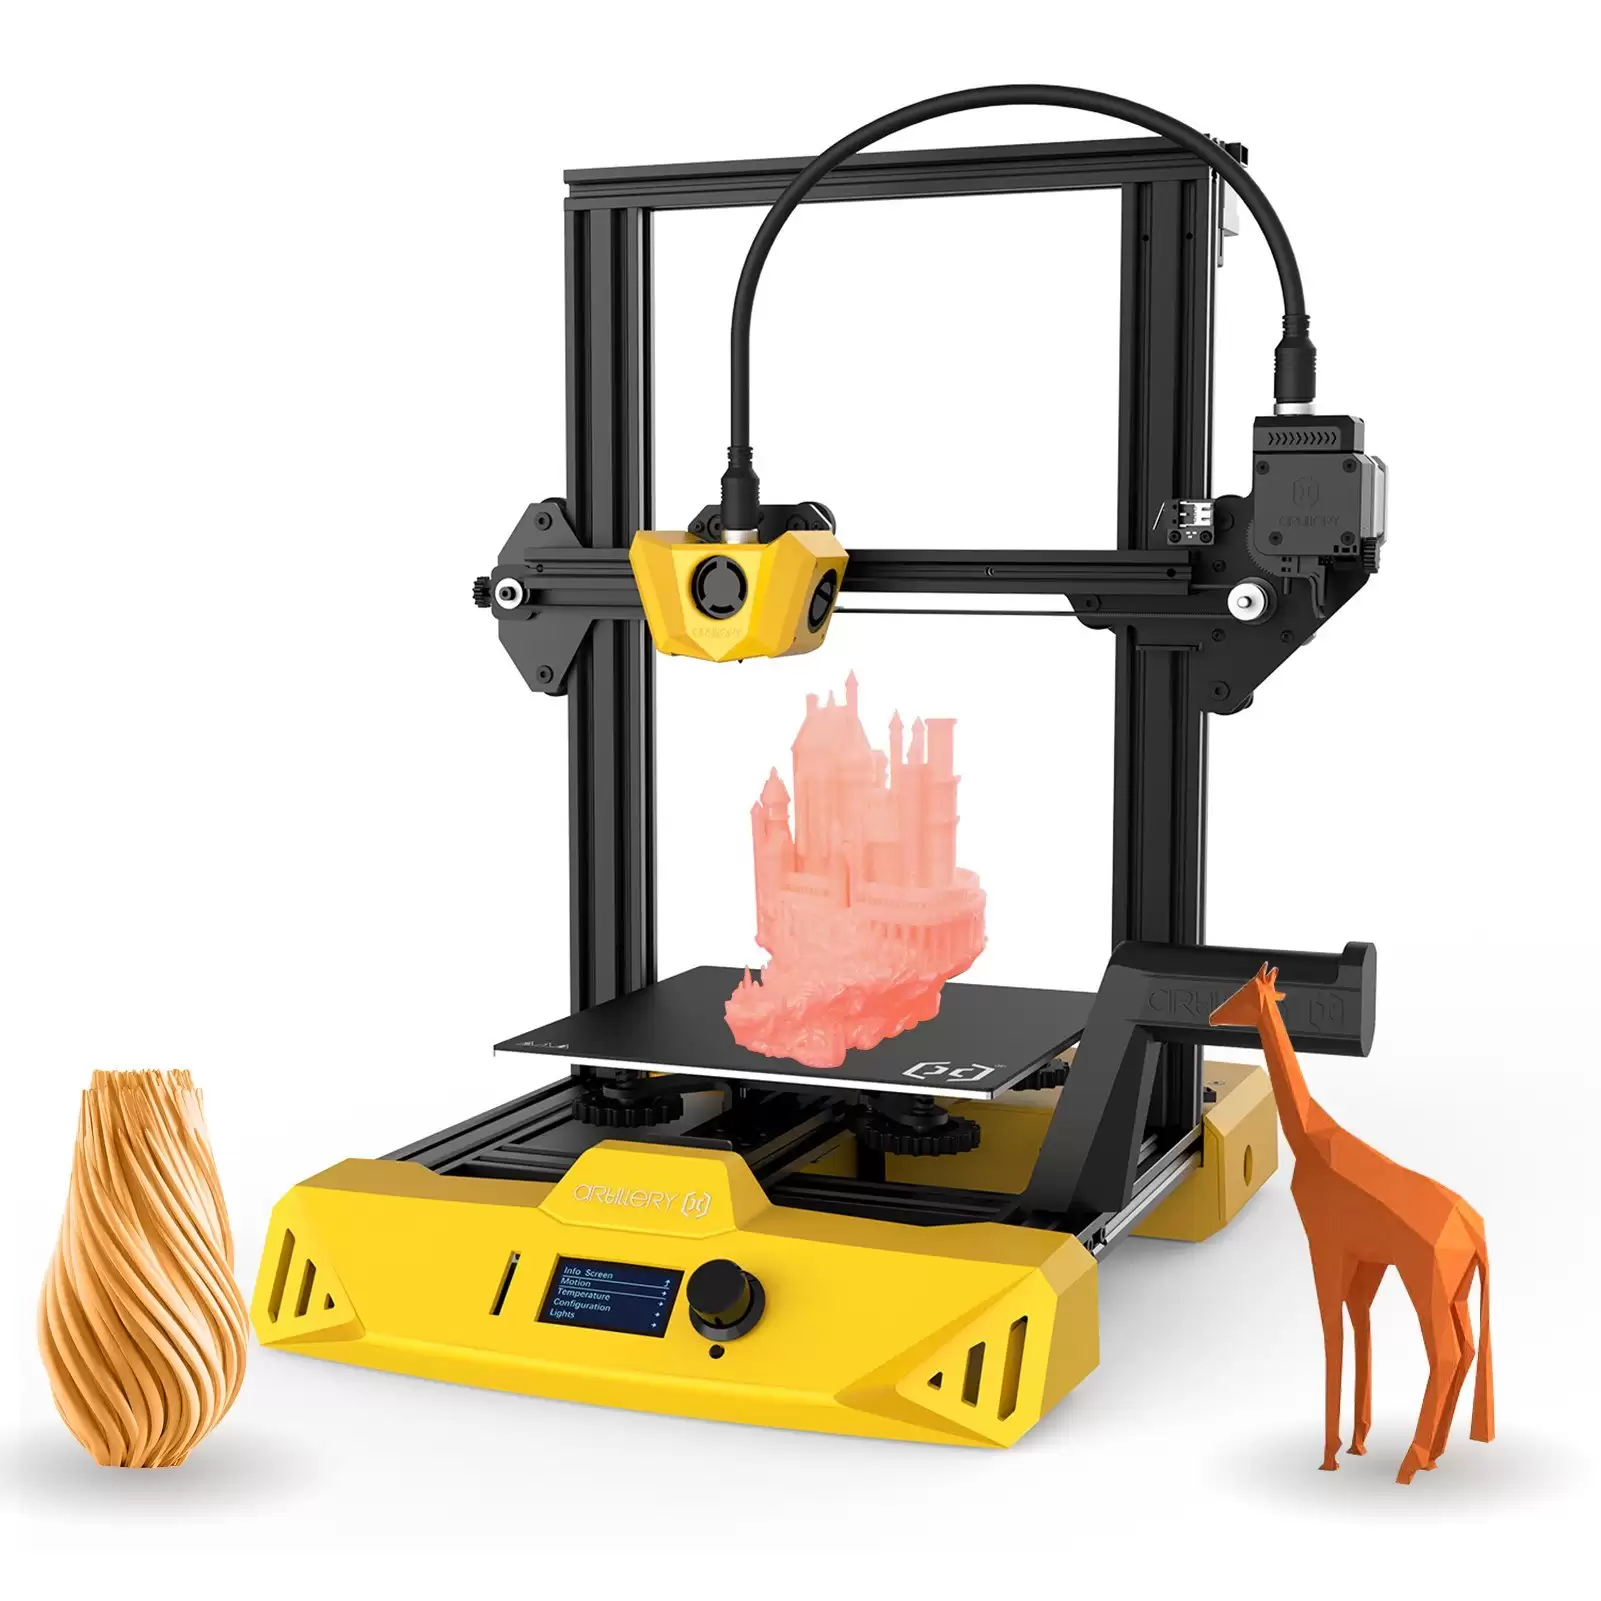 Order In Just $149 Artillery Hornet High Precision 3d Printer With This Tomtop Discount Voucher